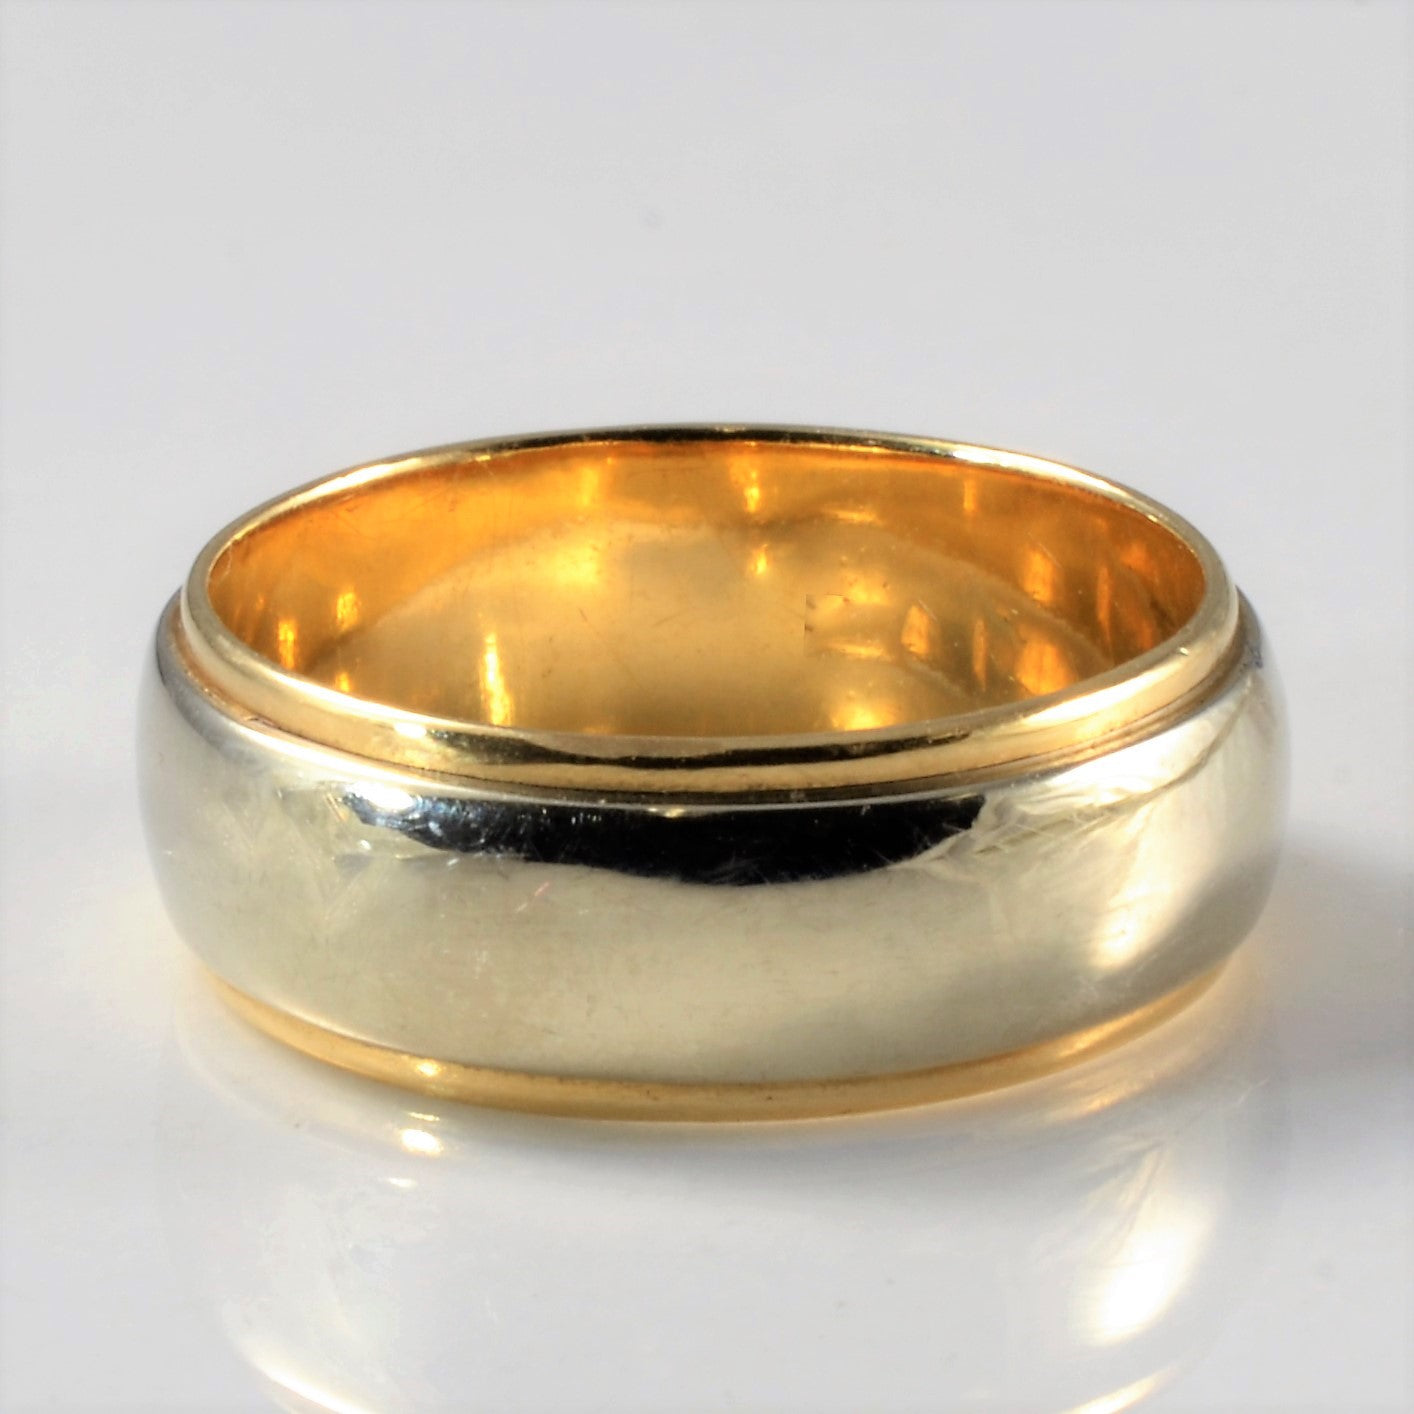 Art Carved' Two Tone Gold Band | SZ 4.75 |